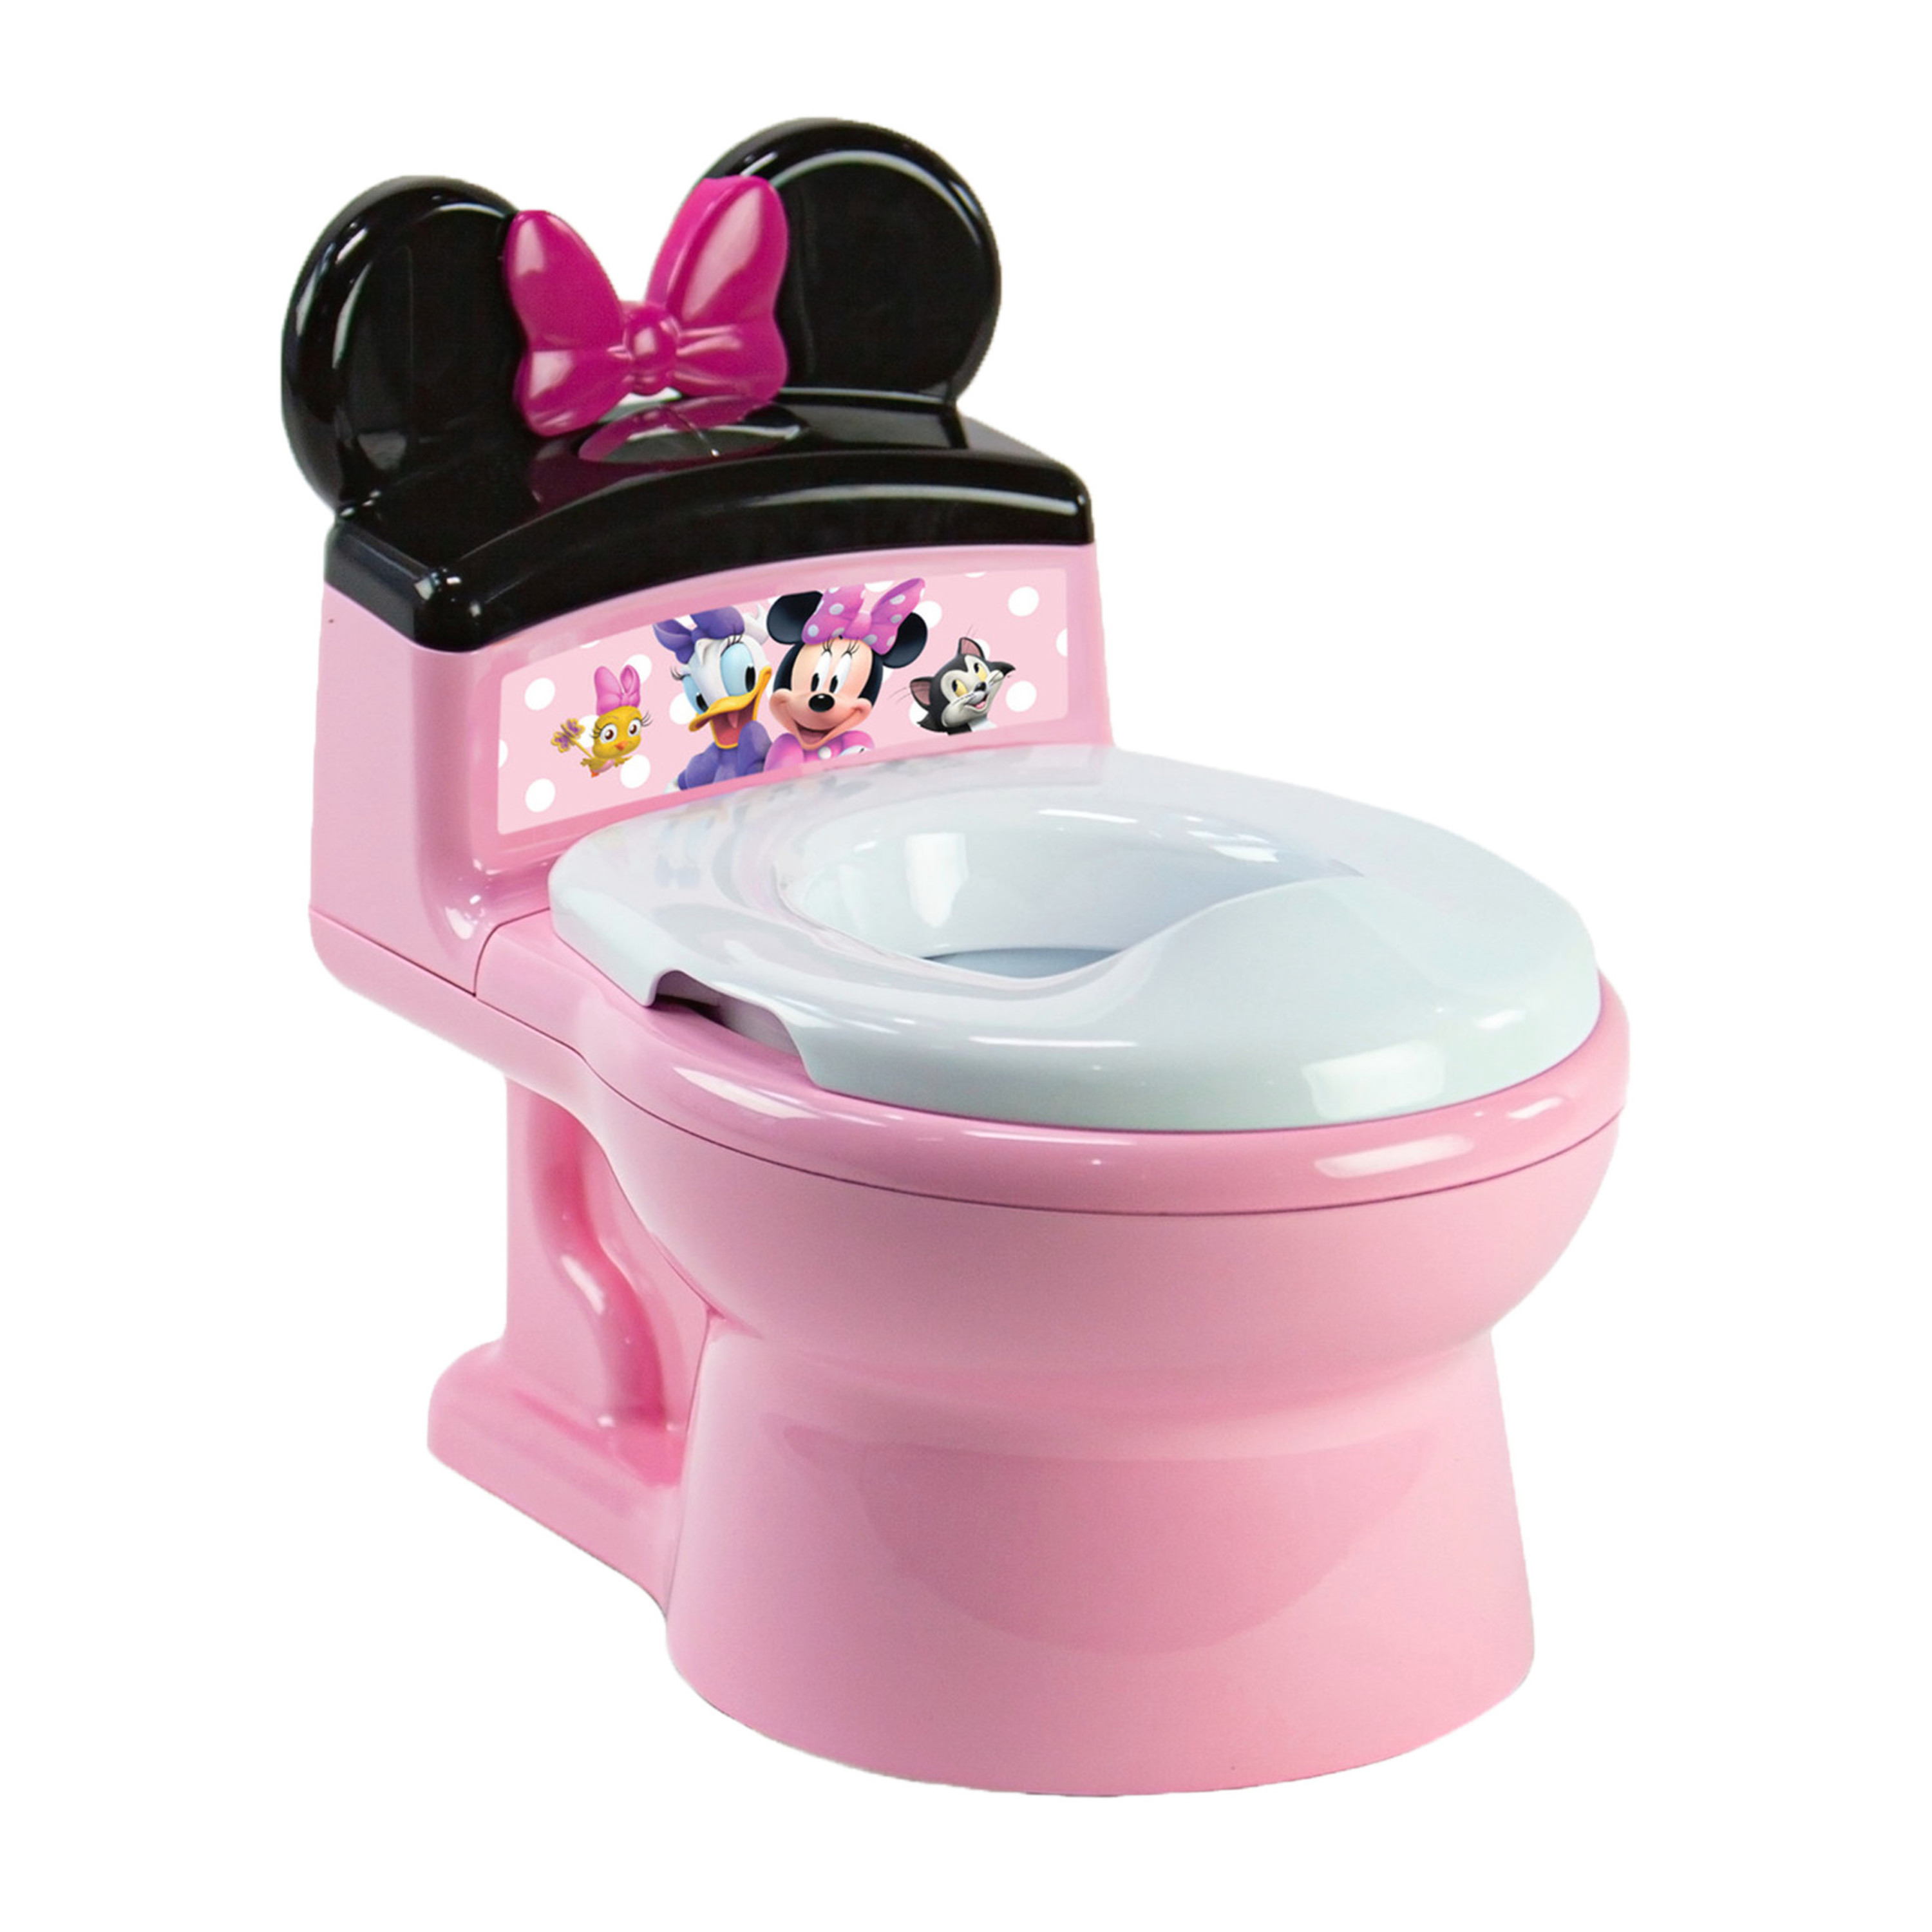 The First Years Disney Minnie Mouse 2-in-1 Potty Training Toilet, Toddler Toilet and Training Seat - image 1 of 9